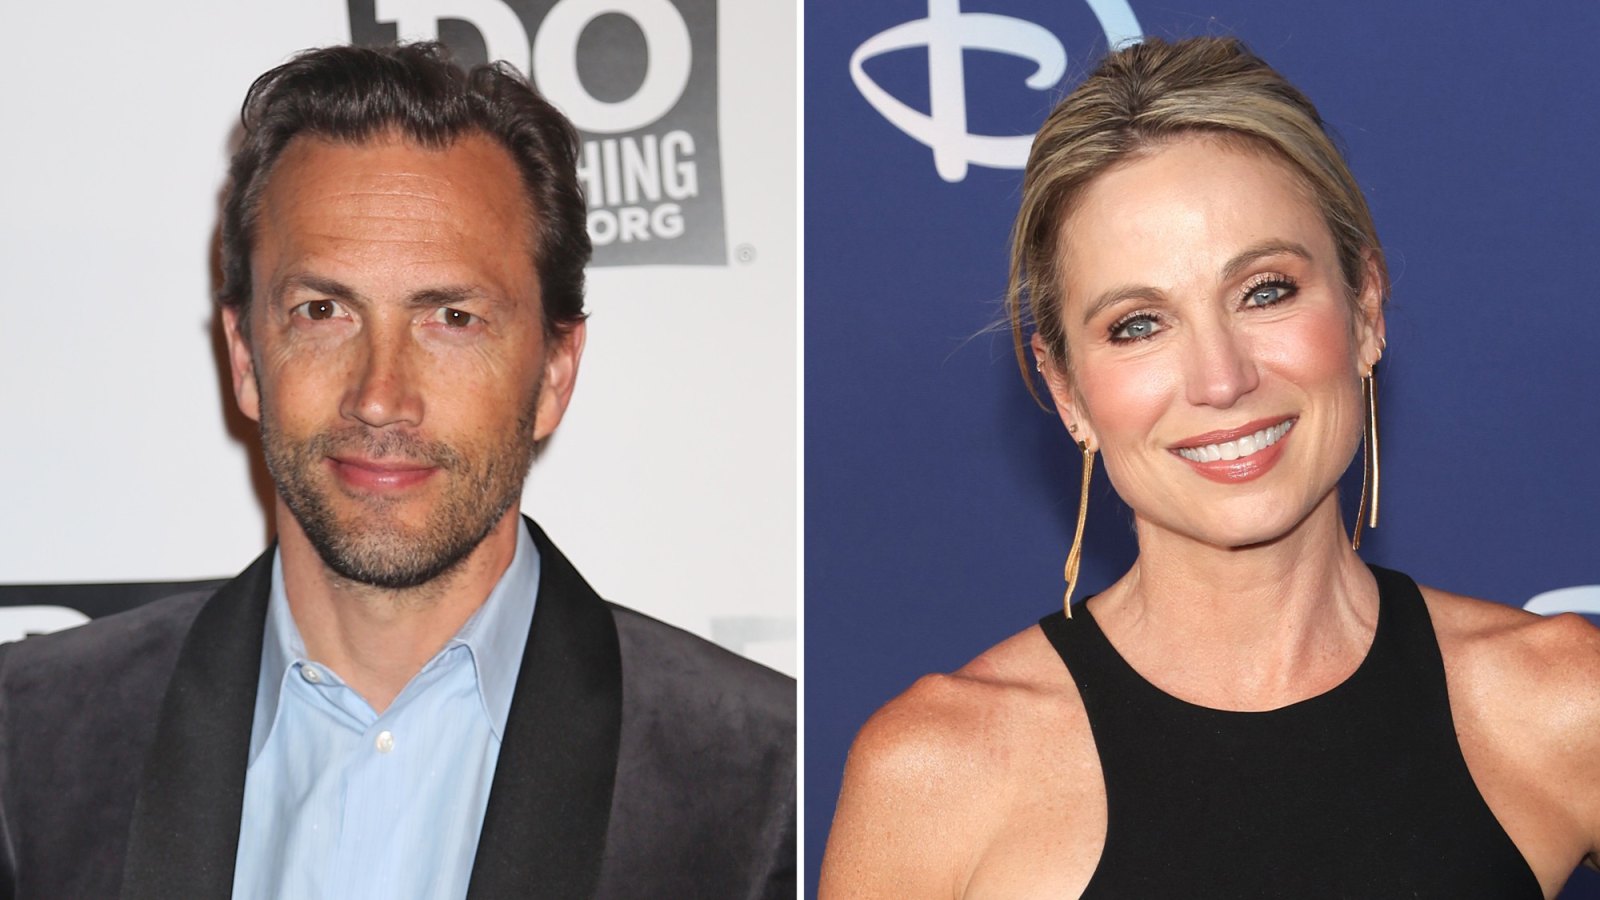 Andrew Shue Is Spending More Quality Time With His Sons After Amy Robach Split